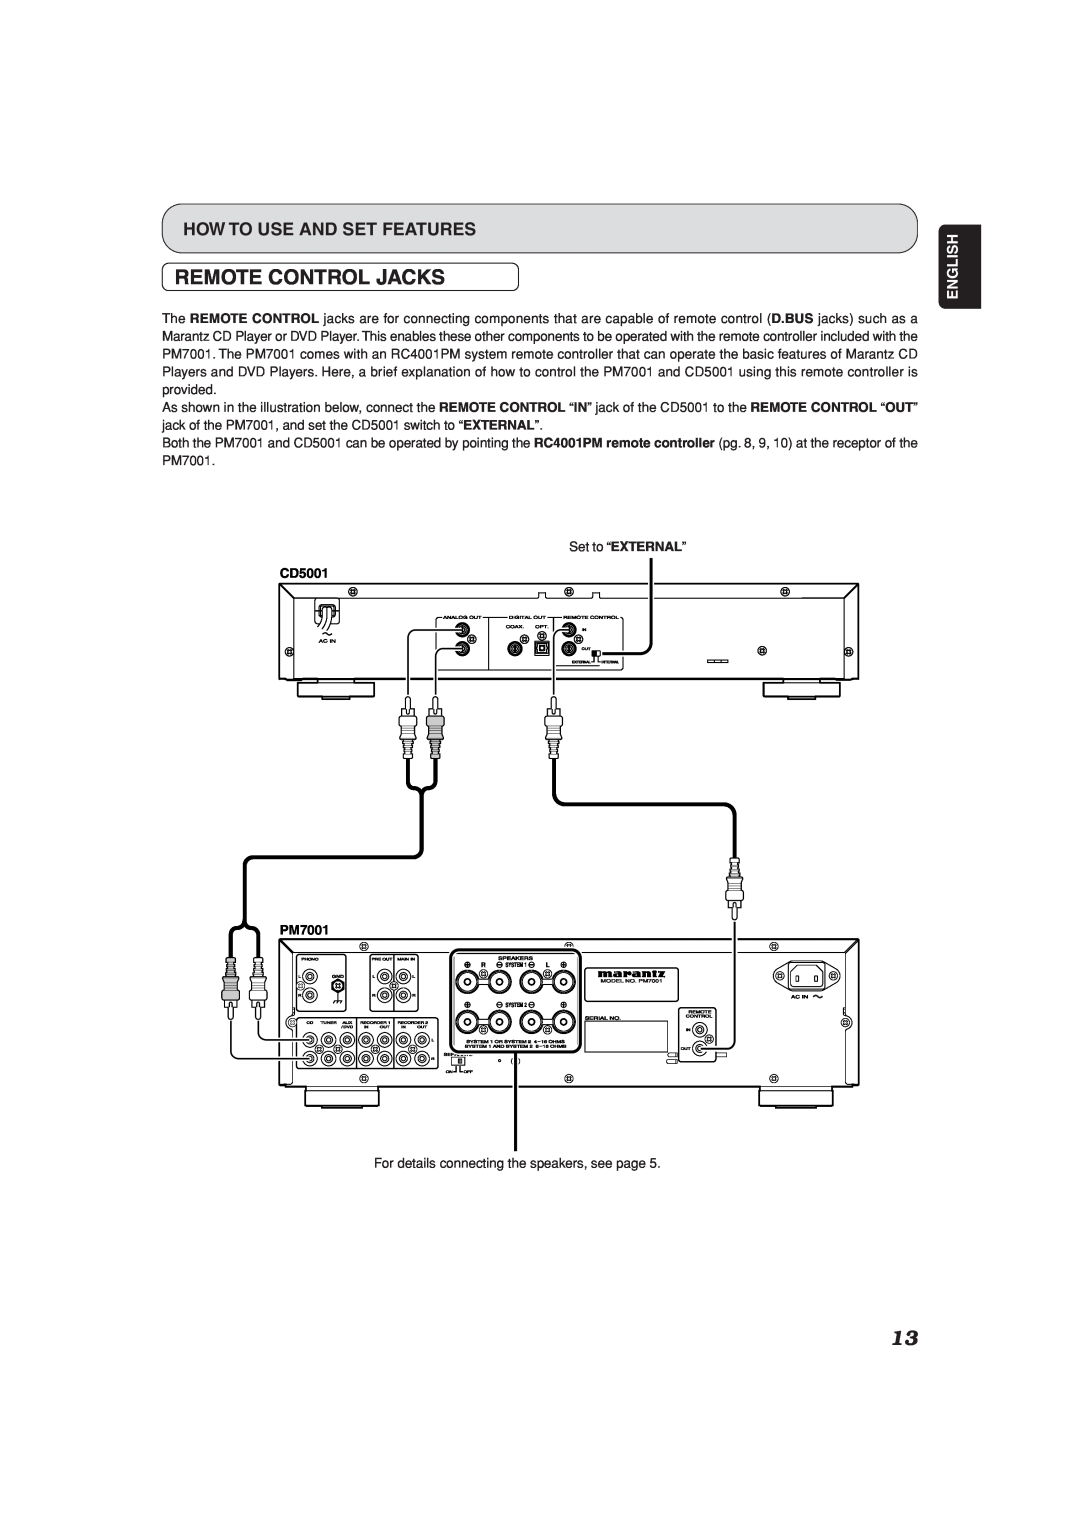 Marantz manual Remote Control Jacks, How To Use And Set Features, English, CD5001 PM7001 